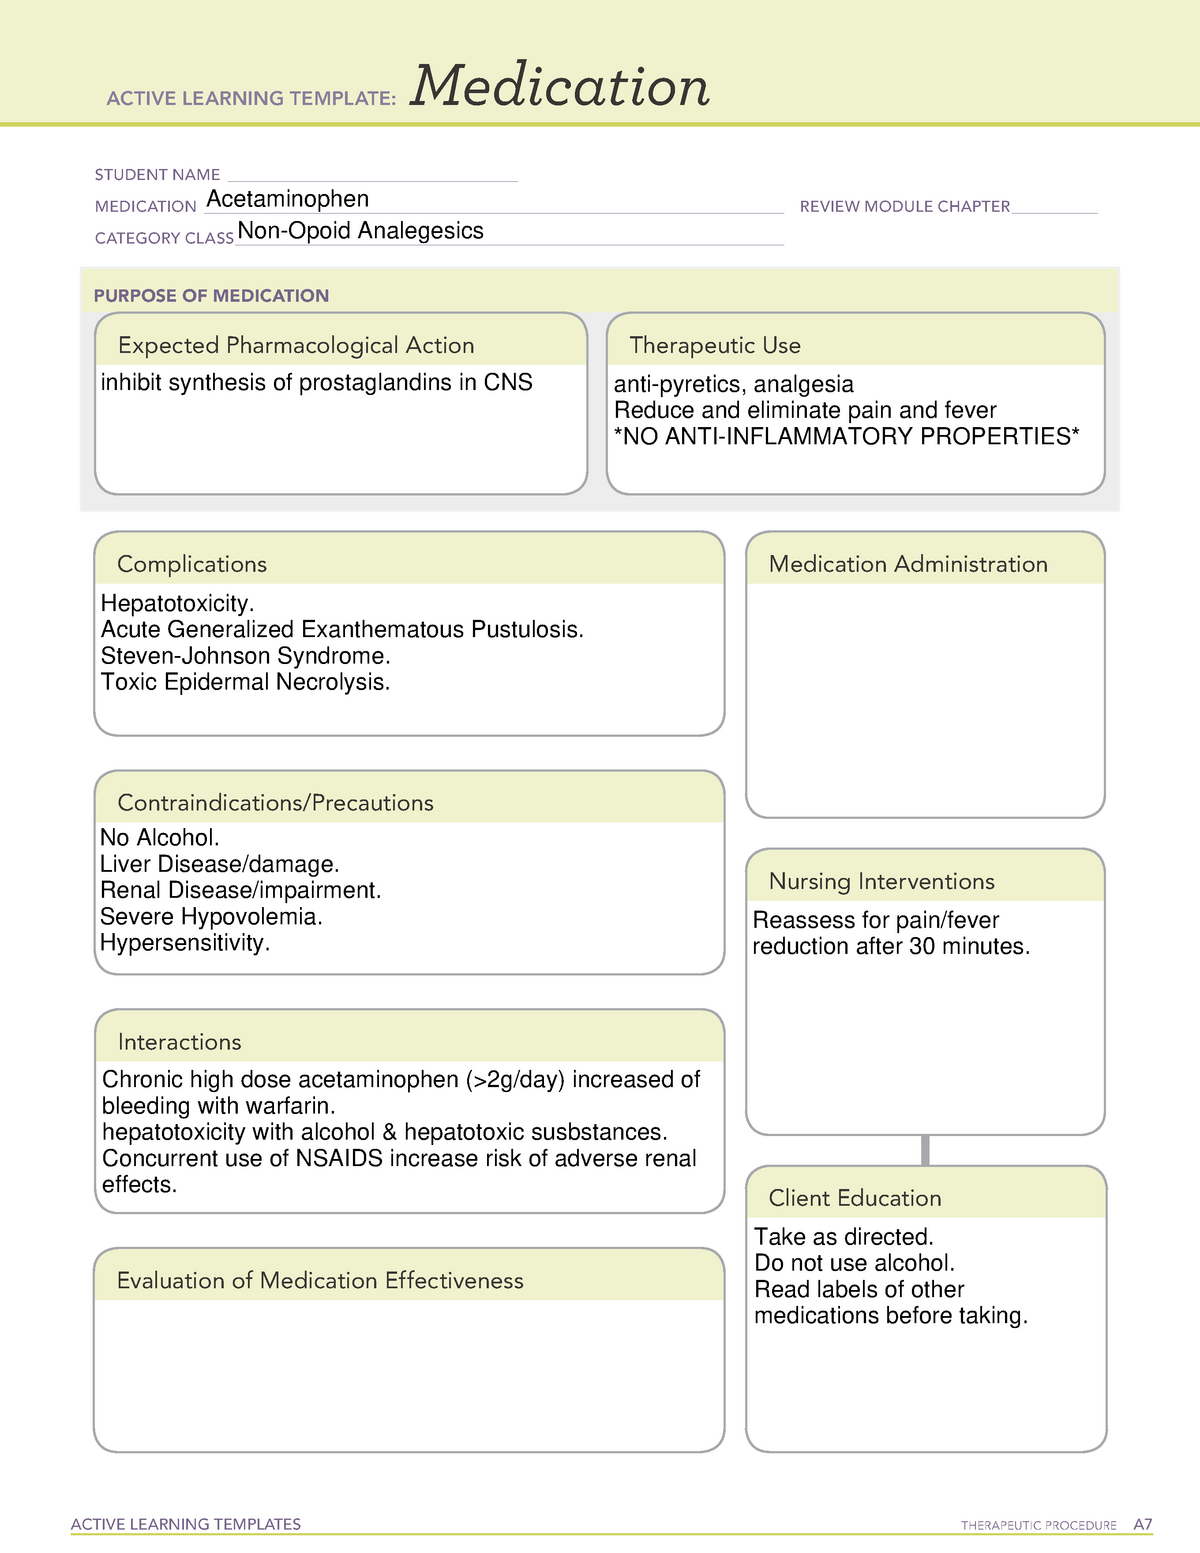 Acetaminophen ATI Medication Template ACTIVE LEARNING TEMPLATES